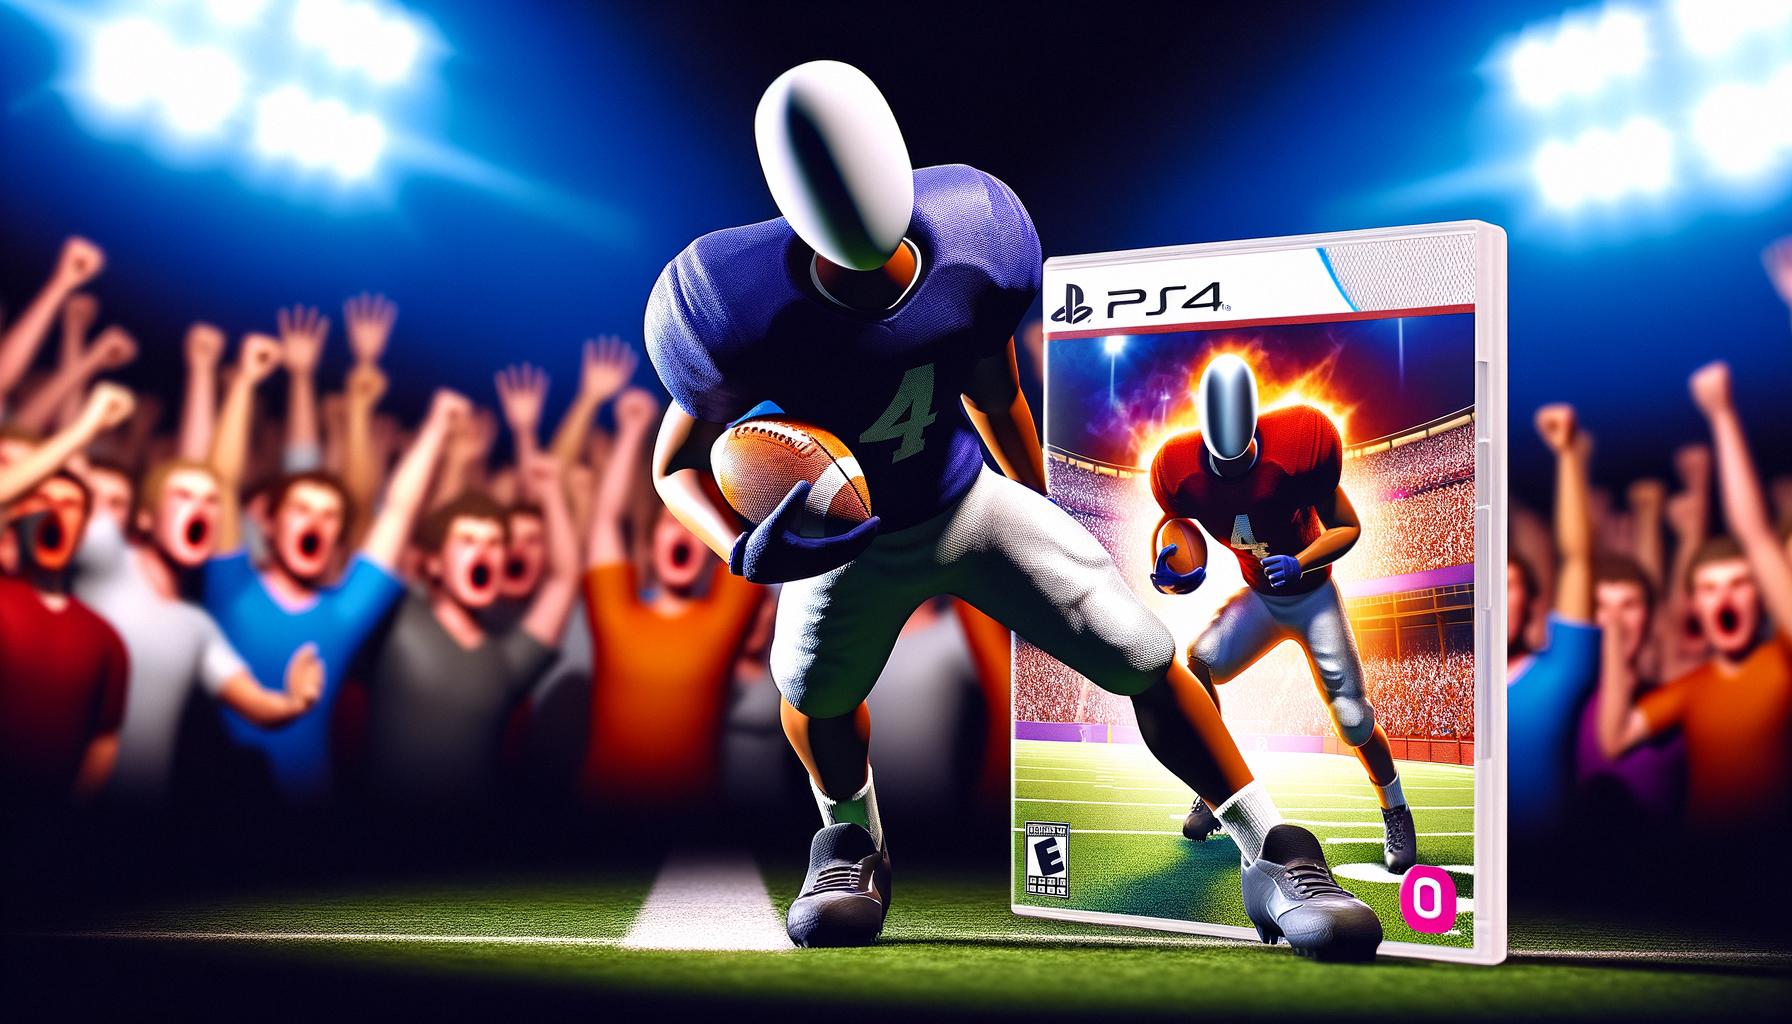 EA Sports revives college football video game after 11-year hiatus Balanced News